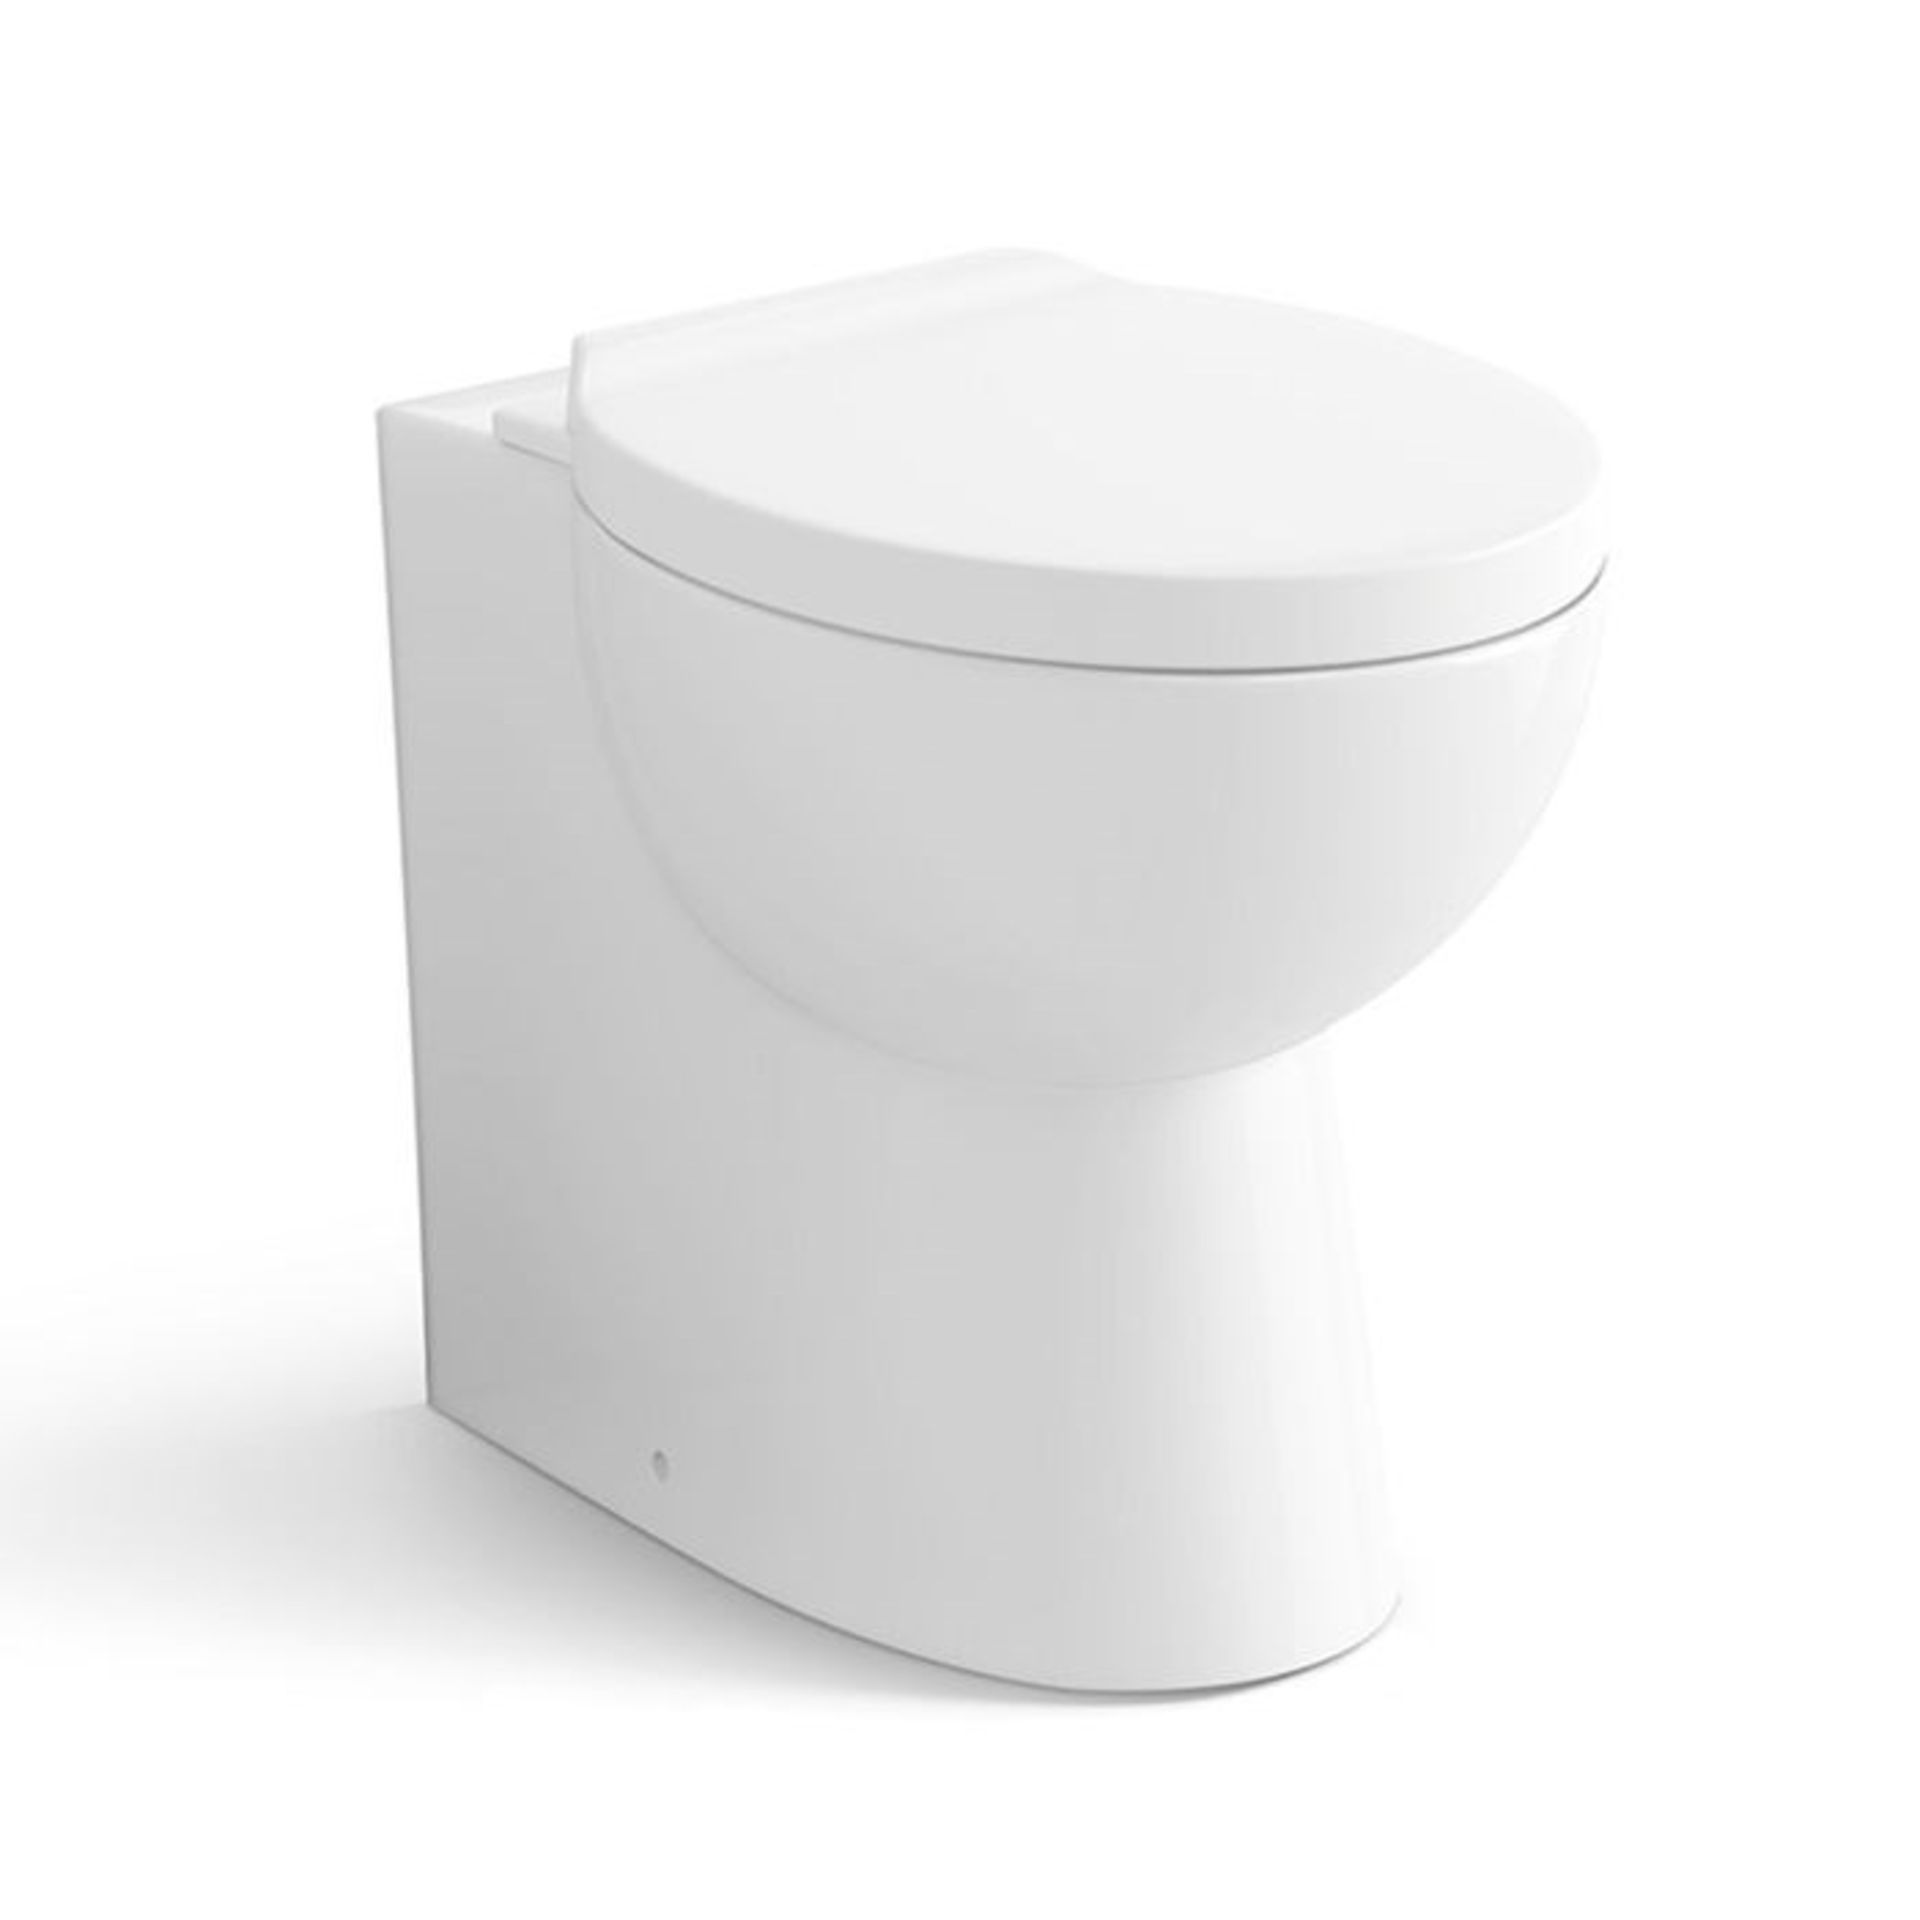 Back to Wall Toilet. Stylish design Made from White Vitreous China Finished in a high gloss gla...